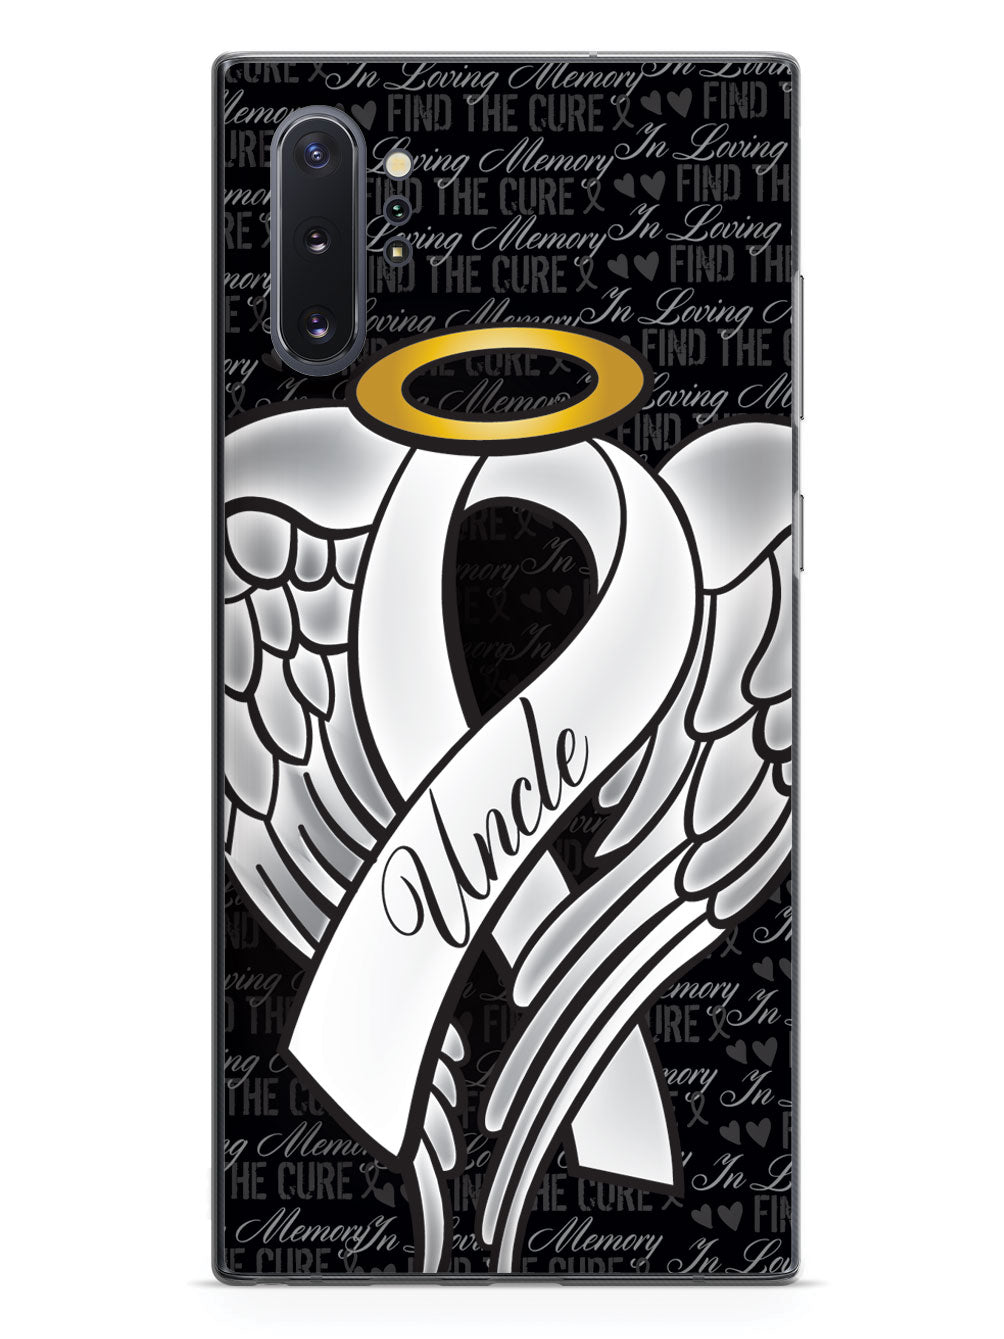 In Loving Memory of My Uncle - White Ribbon Case